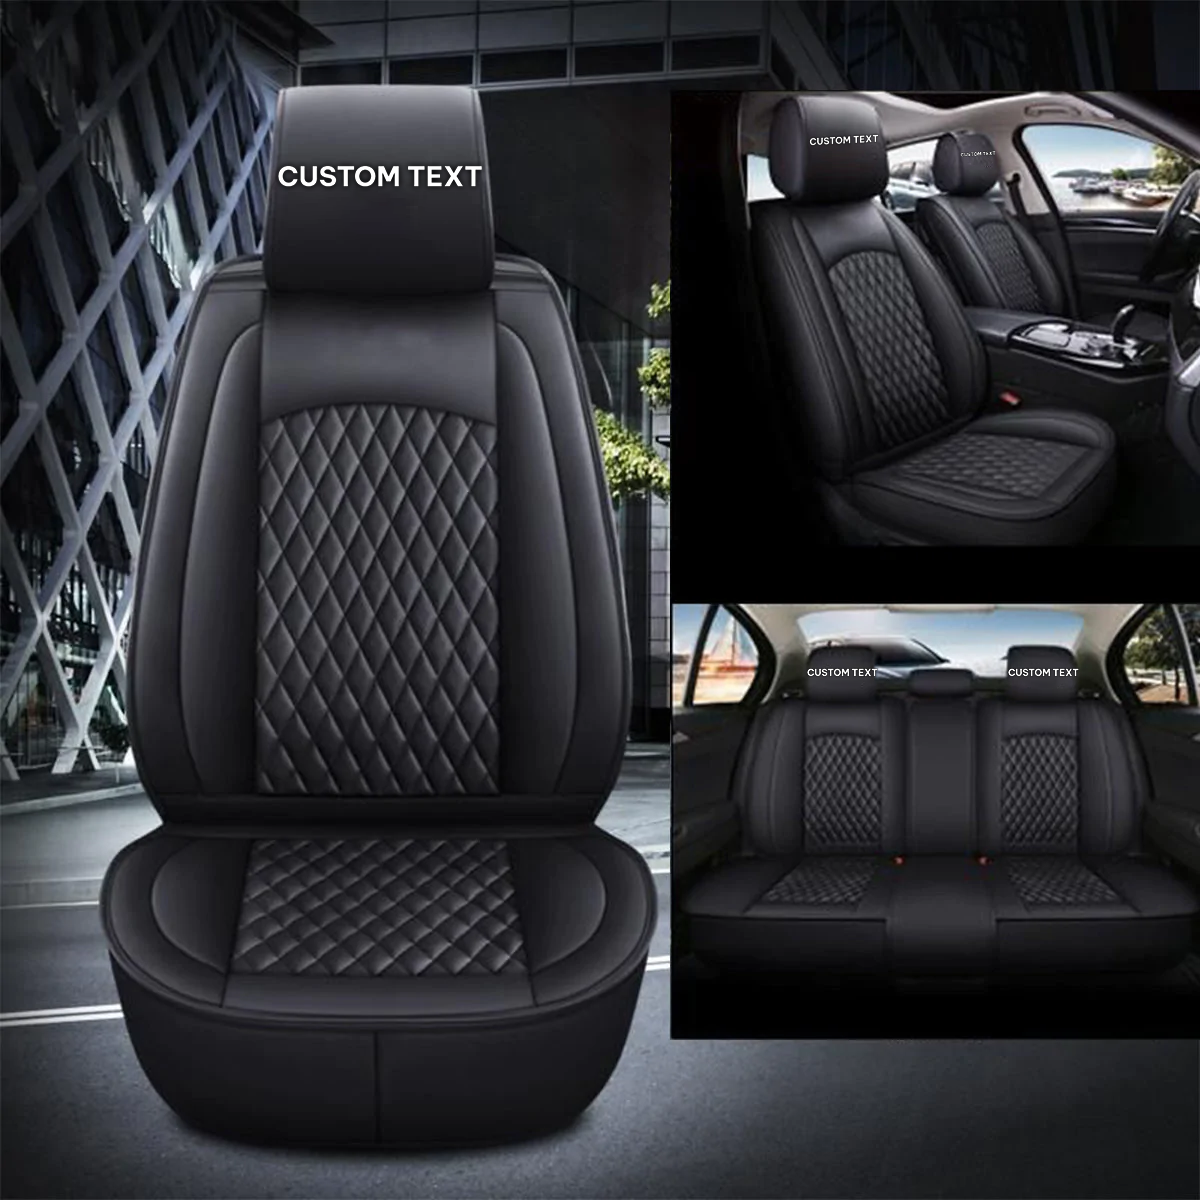 Custom Text For Seat Covers 5 Seats Full Set, Custom Fit For Your Cars, Leatherette Automotive Seat Cushion Protector Universal Fit, Vehicle Auto Interior Decor JE13988